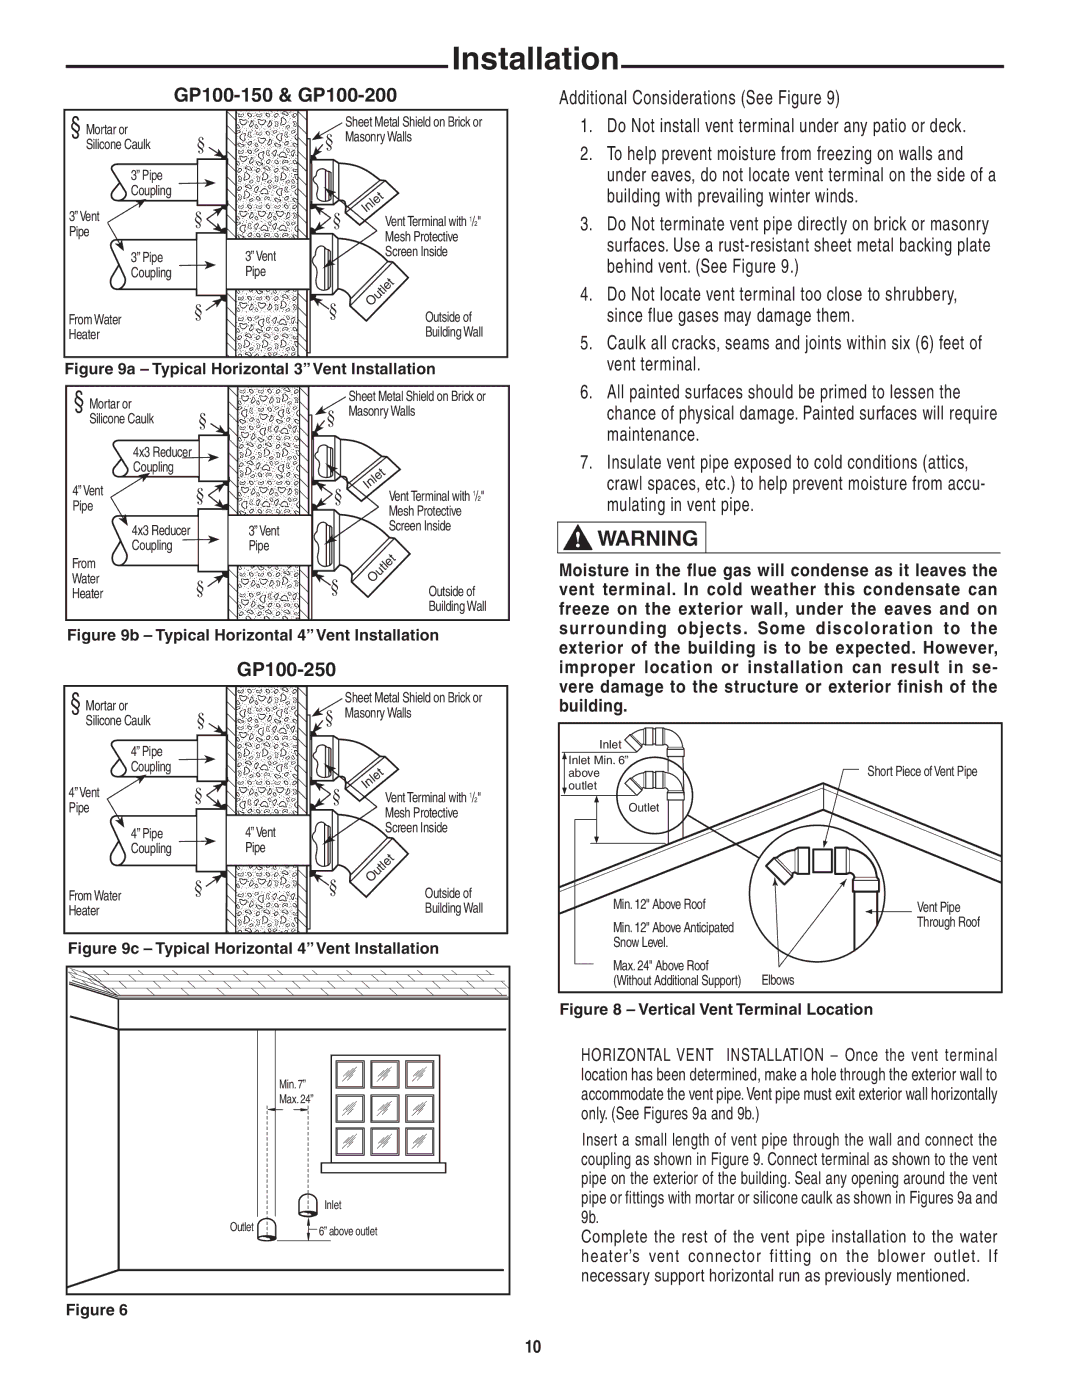 Rheem Commercial Power Direct Vent Water heater installation instructions Additional Considerations See Figure, Building 